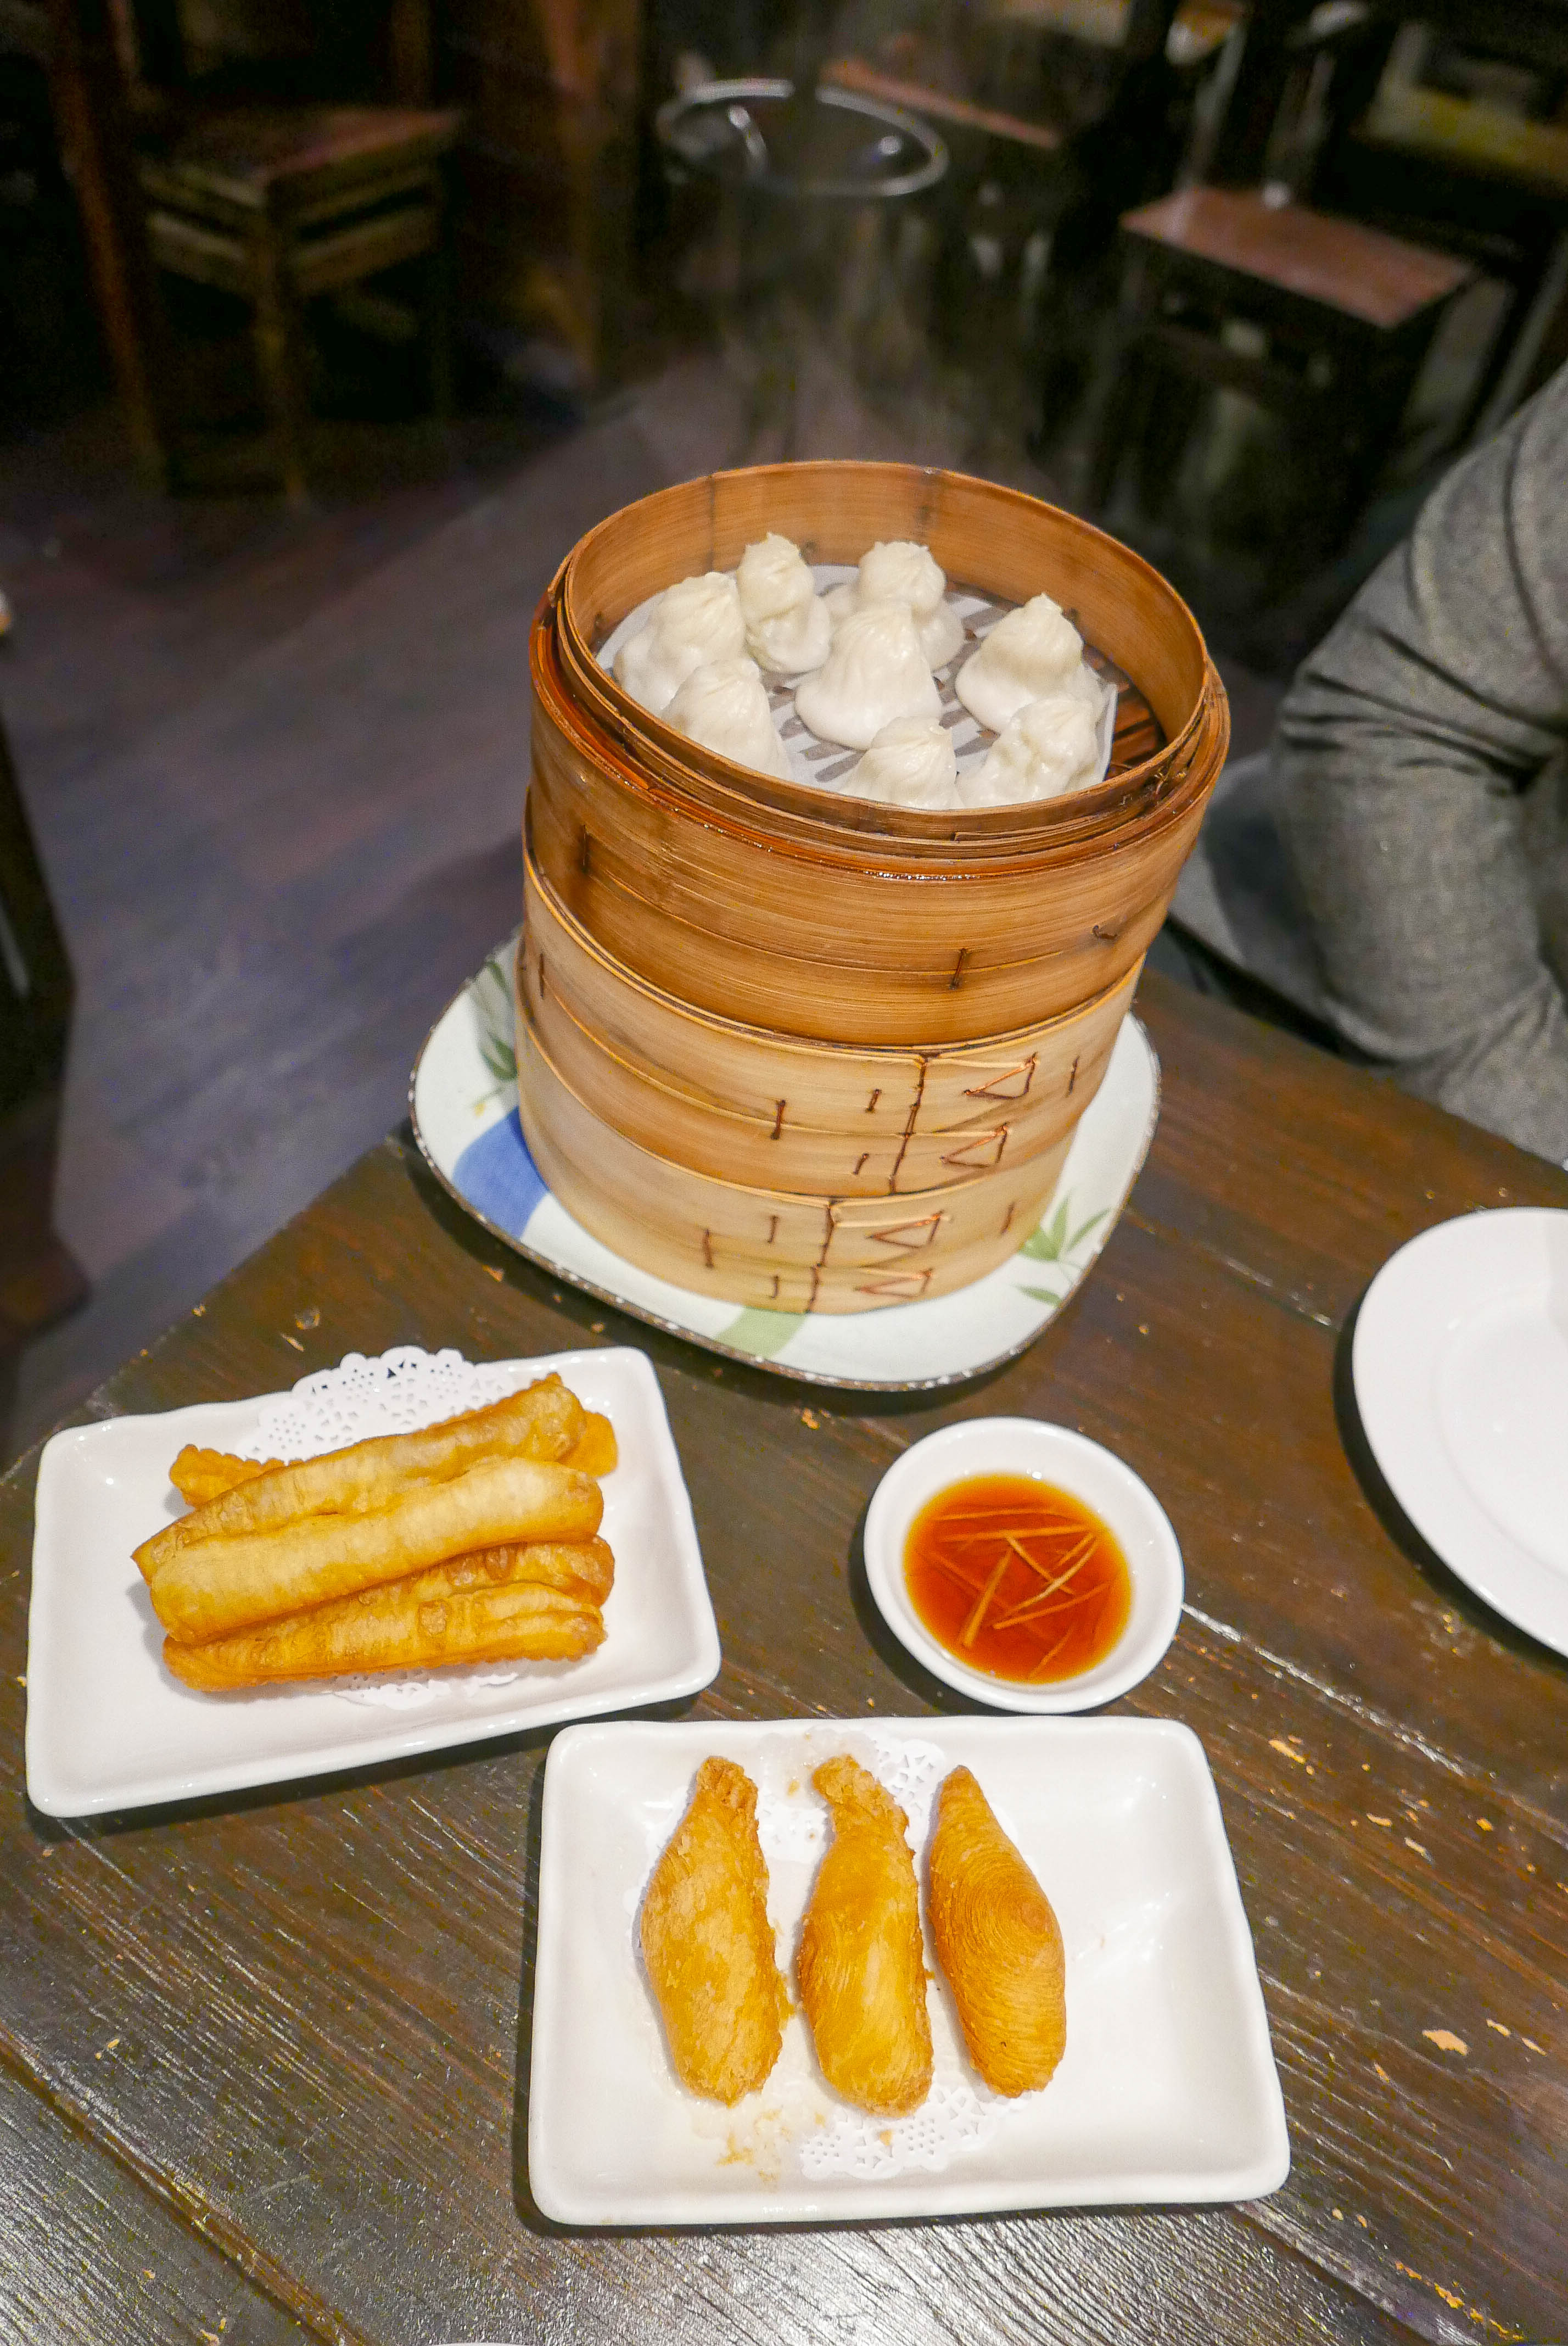 5 great places to eat in Chinatown